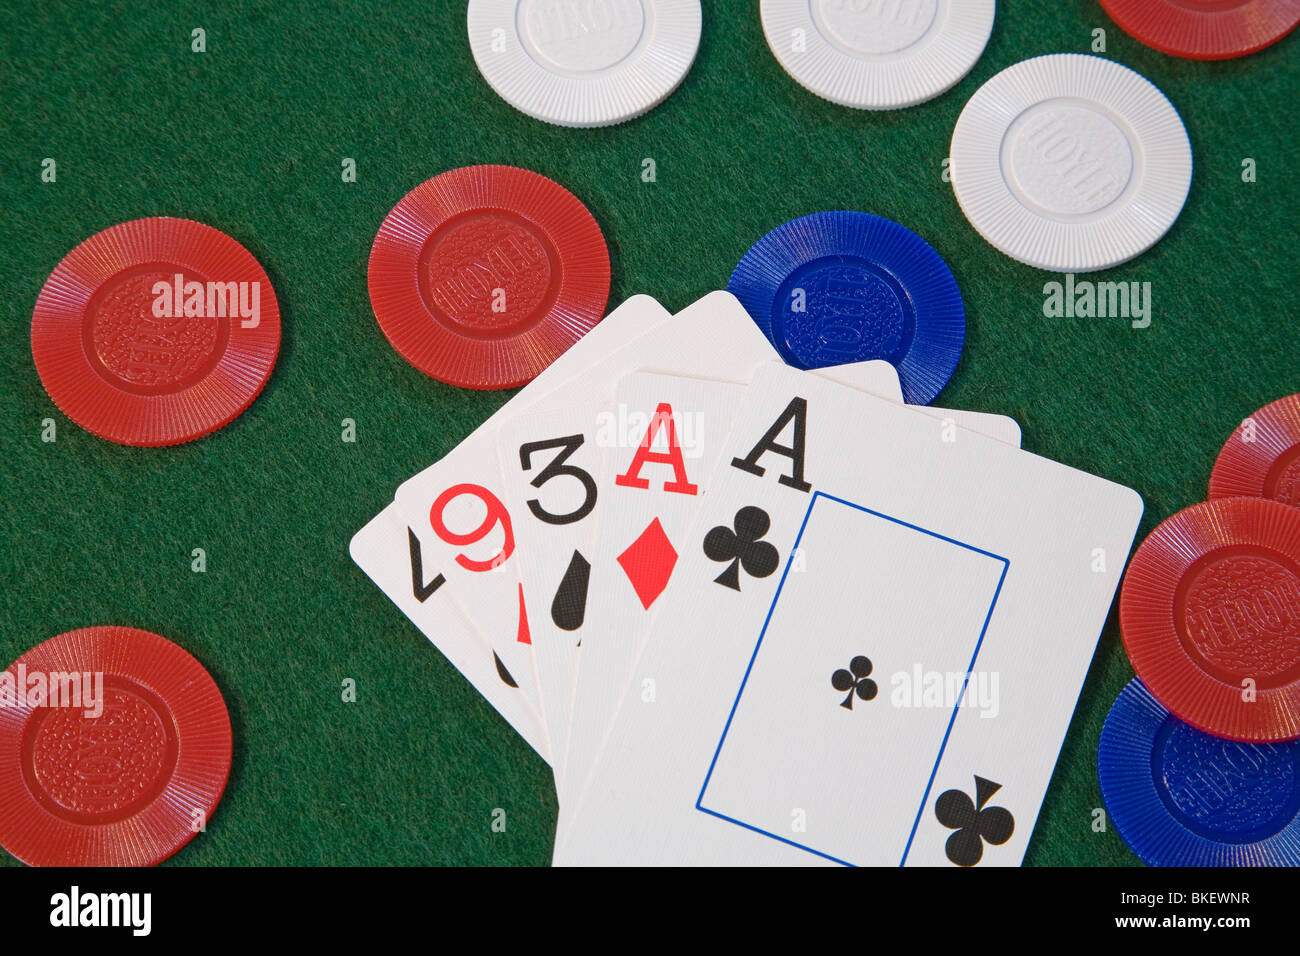 A pair of aces on poker chips, a poker hand in five card draw or stud poker Stock Photo